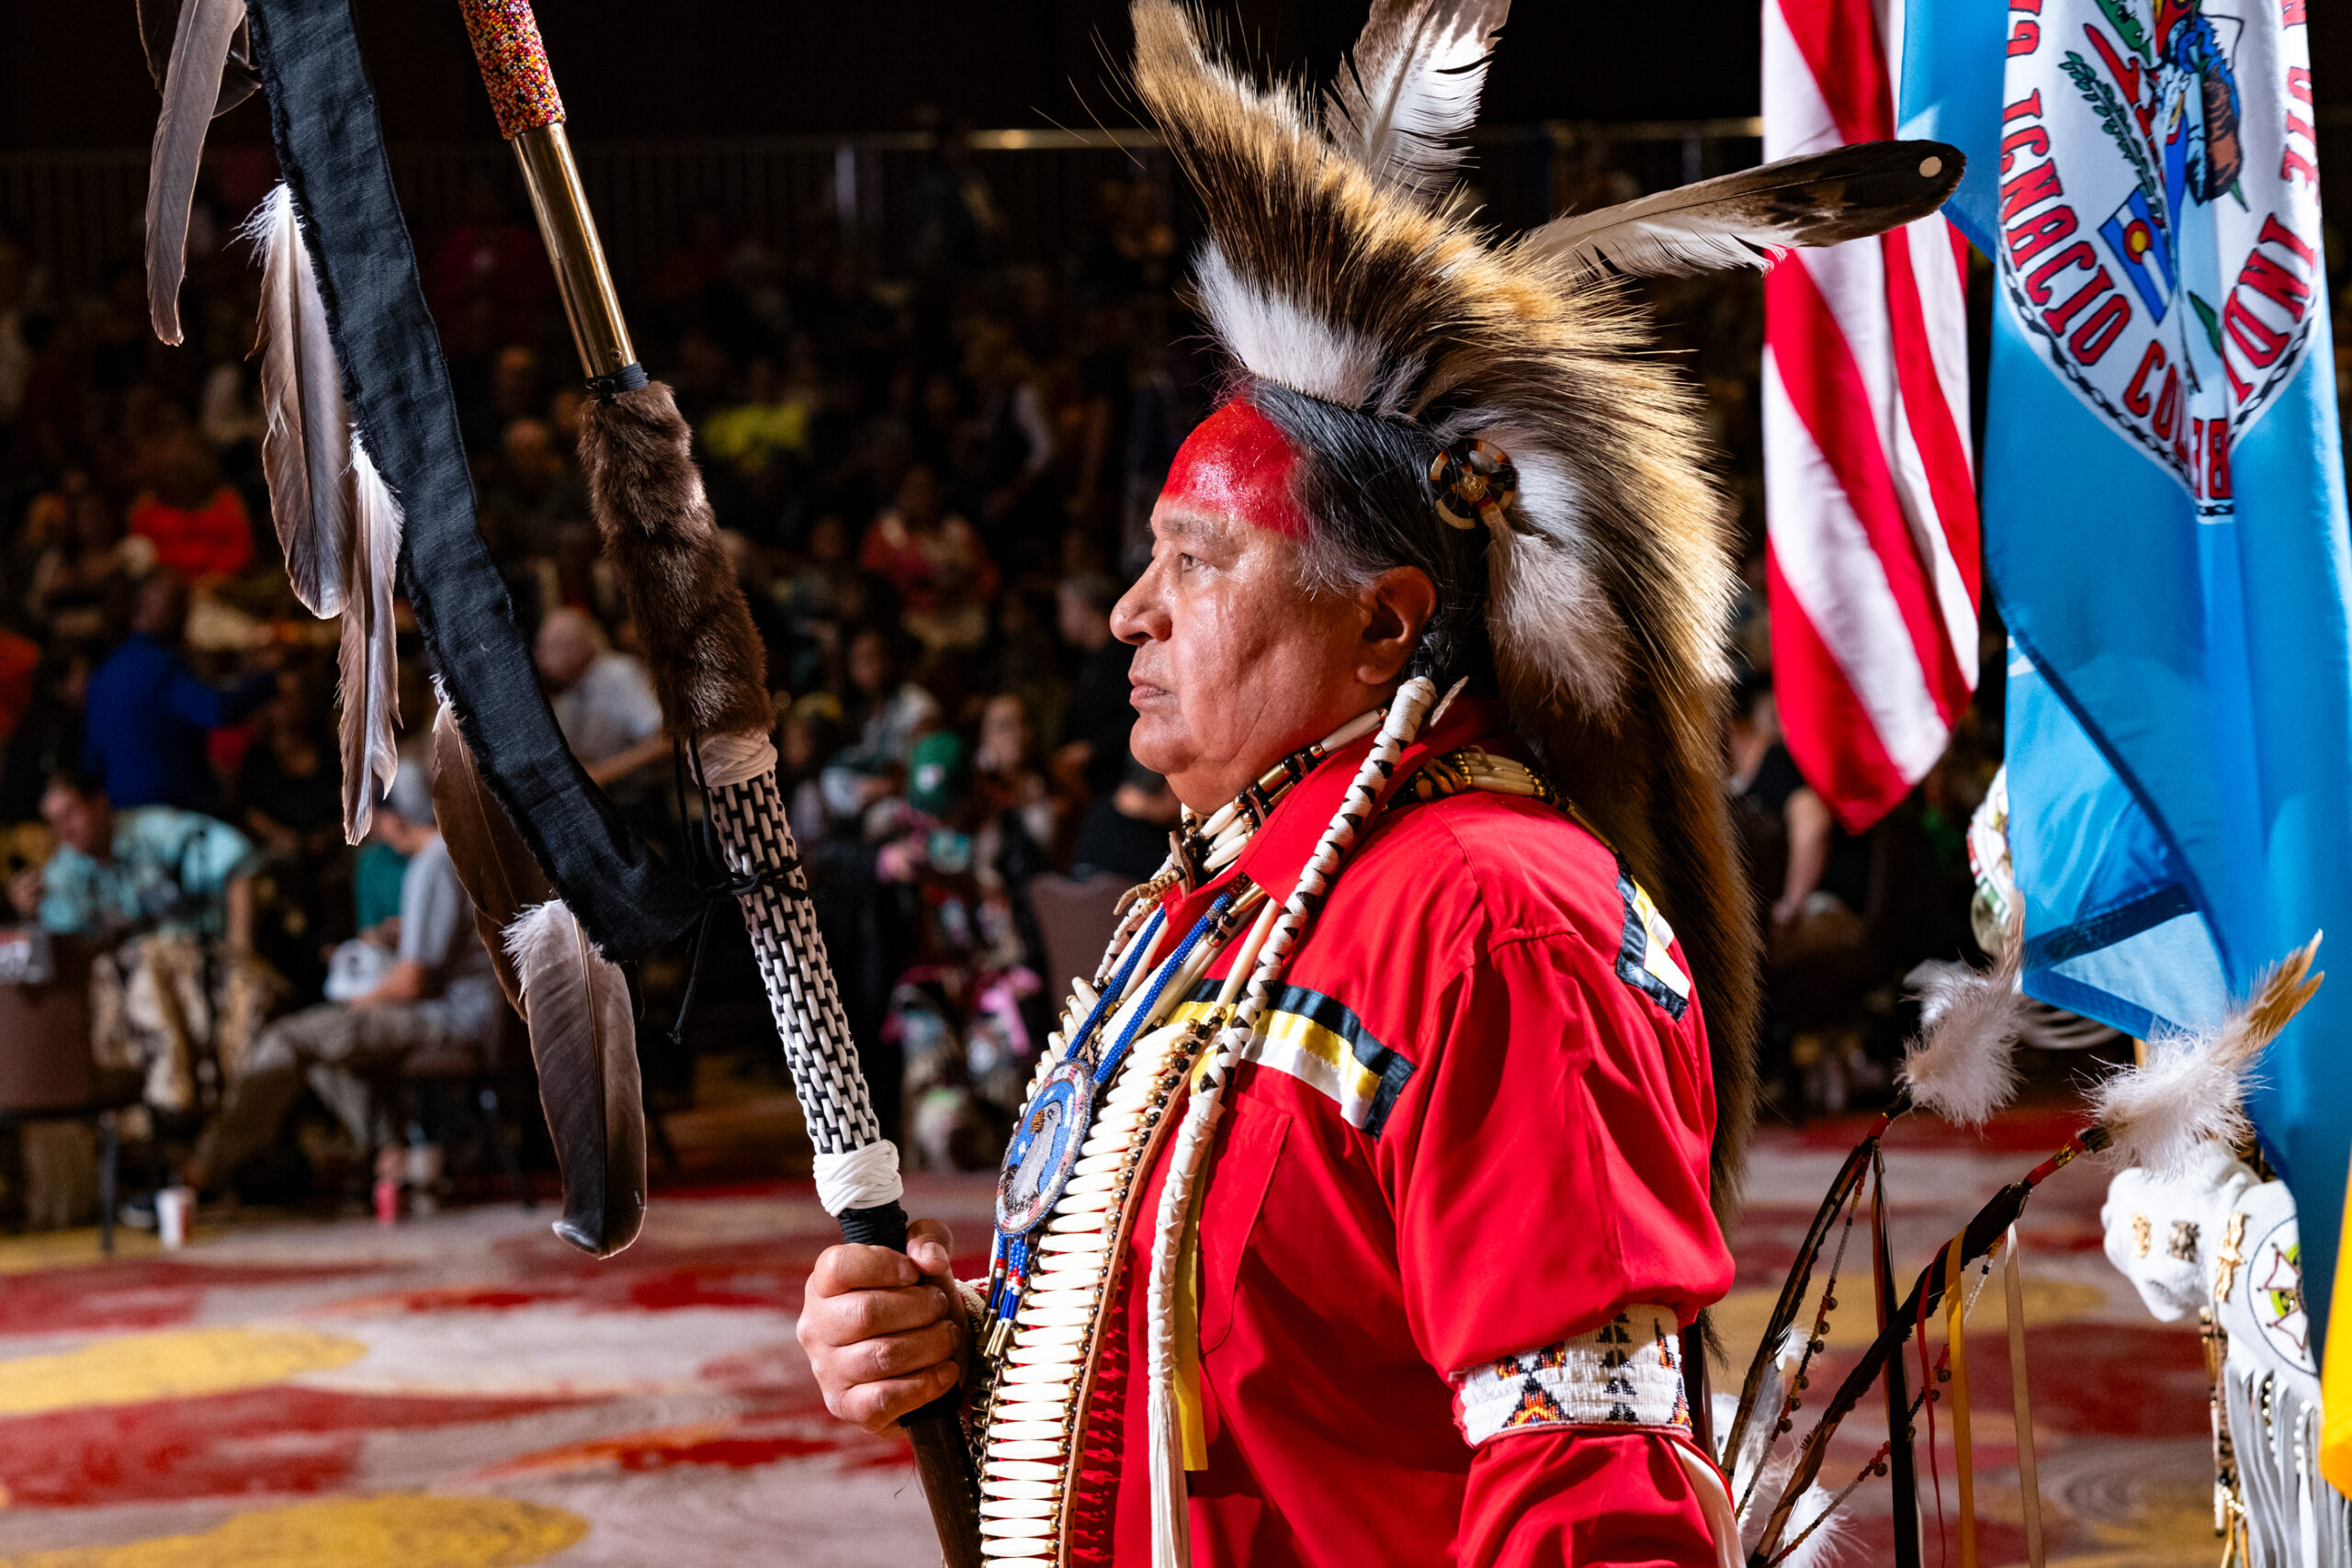 Southern Ute Veterans Association treasurer, Bruce LeClaire (U.S. Army), brings in the Eagle Staff during Grand Entry at the 51st annual Seminole Tribal Fair and Powwow in Hollywood, Fla. — the powwow brought Native Color Guards from across Indian Country for the “Battle of the Guards” contest special on Saturday, Feb. 10.